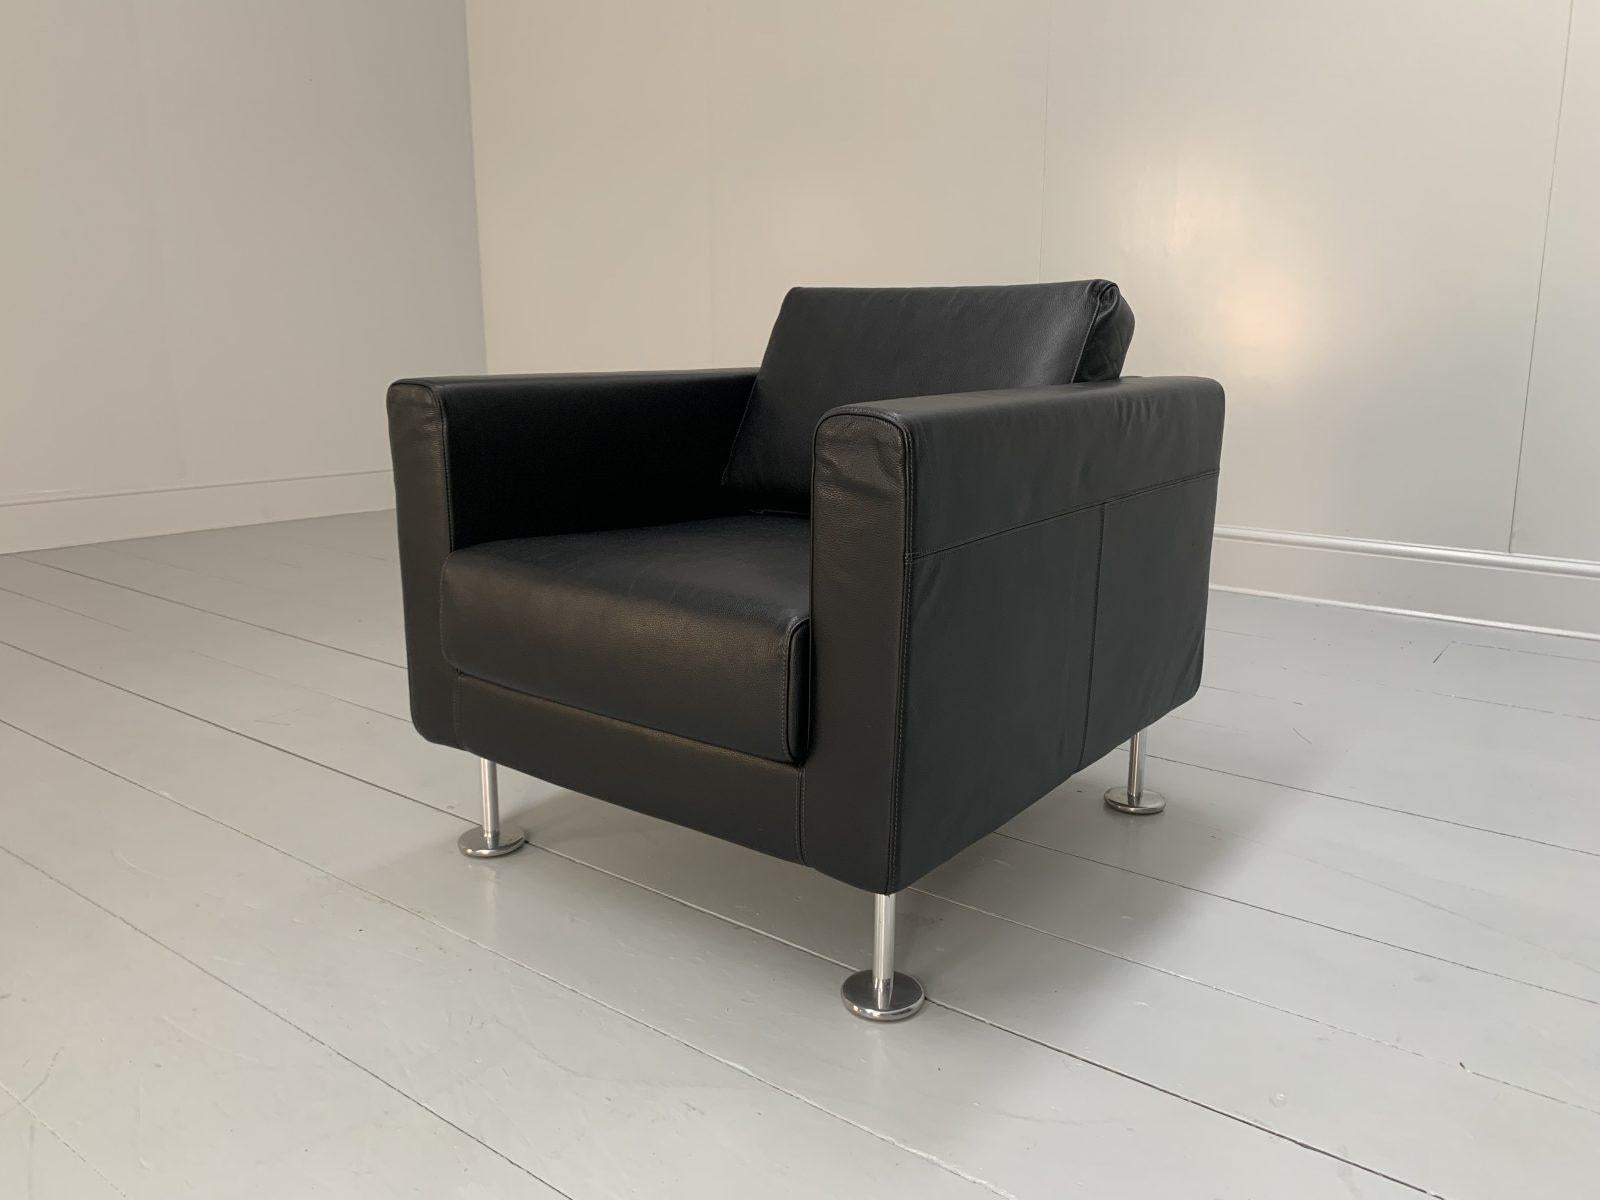 Hello Friends, and welcome to another unmissable offering from Lord Browns Furniture, the UK’s premier resource for fine Sofas and Chairs.

On offer on this occasion is an ultra-rare, pristine “Park” Armchair, dressed in a high-grade Jet-Black